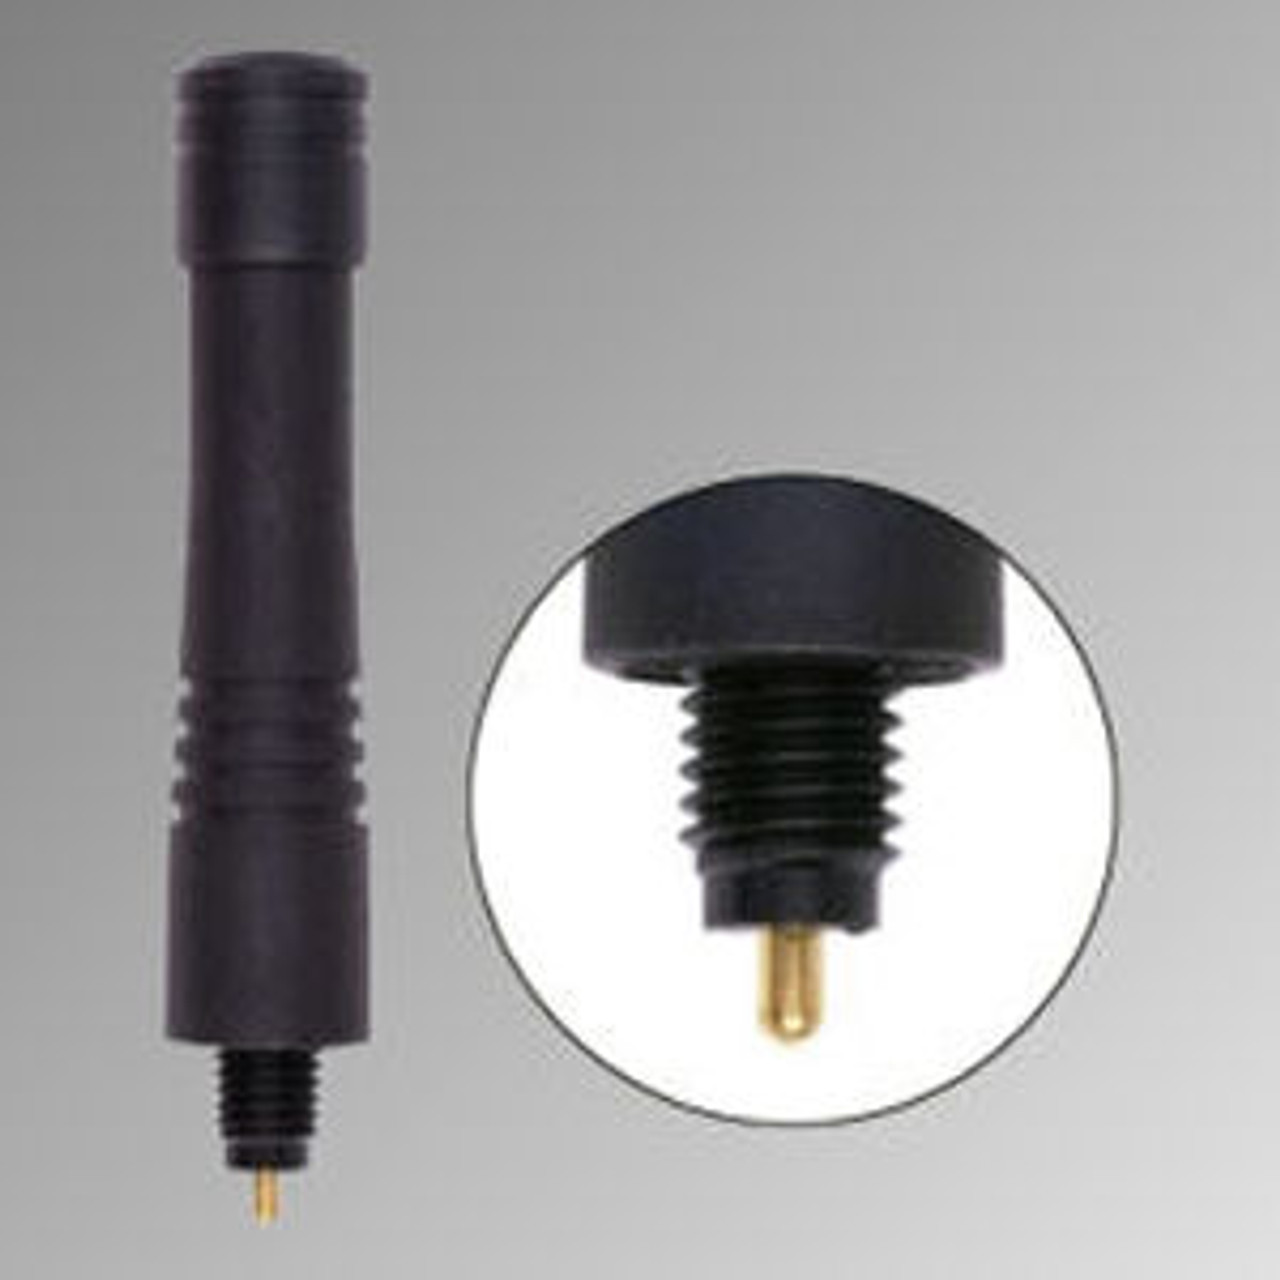 Replacement For M/A-Com HTNC5B Antenna - 3", UHF, 400-420 MHz